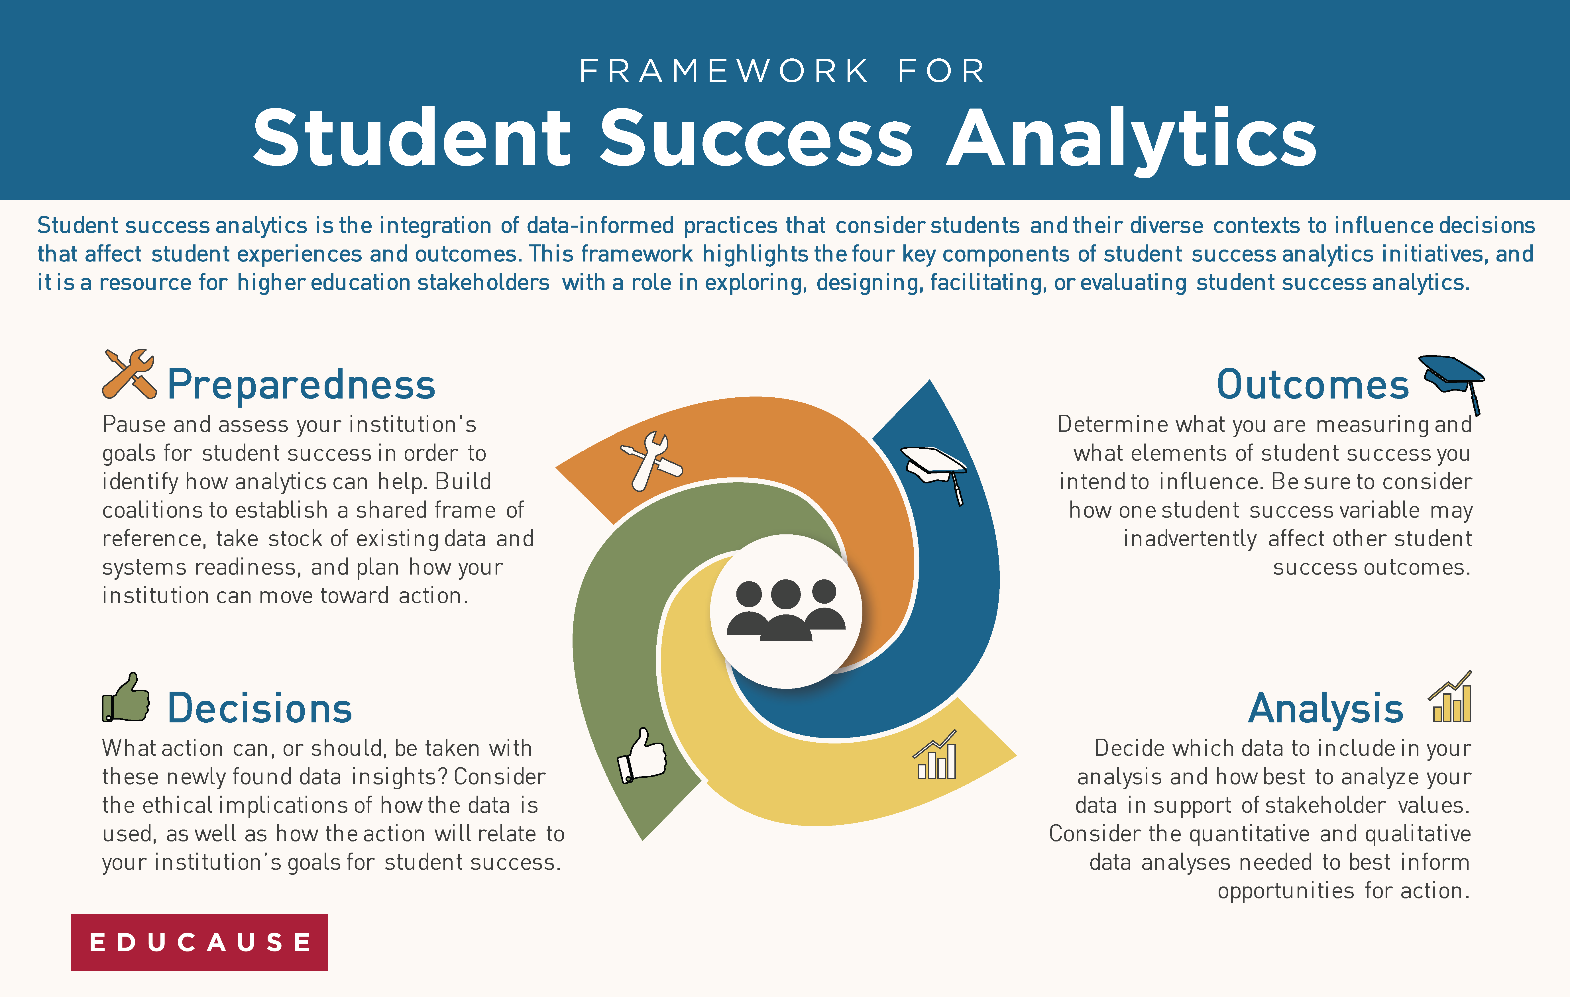 Title: FRAMEWORK FOR Student Success Analytics.   Content: Student success analytics is the integration of data-informed practices that consider students and their diverse contexts to influence decisions that affect student experiences and outcomes. This framework highlights the four key components of student success analytics initiatives, and it is a resource for higher education stakeholders with a role in exploring, designing, facilitating, or evaluating student success analytics.  Preparedness | Pause and assess your institution's goals for student success in order to identify how analytics can help. Build coalitions to establish a shared frame of reference, take stock of existing data and systems readiness, and plan how your institution can move toward action.  Decisions | What action can, or should, be taken with these newly found data insights? Consider the ethical implications of how the data is used, as well as how the action will relate to your institution's goals for student success.  Outcomes | Determine what you are measuring and what elements of student success you intend to influence. Be sure to consider how one student success variable may inadvertently affect other student success outcomes.  Analysis | Decide which data to include in your analysis and how best to analyze your data in support of stakeholder values. Consider the quantitative and qualitative data analyses needed to best inform opportunities for action.